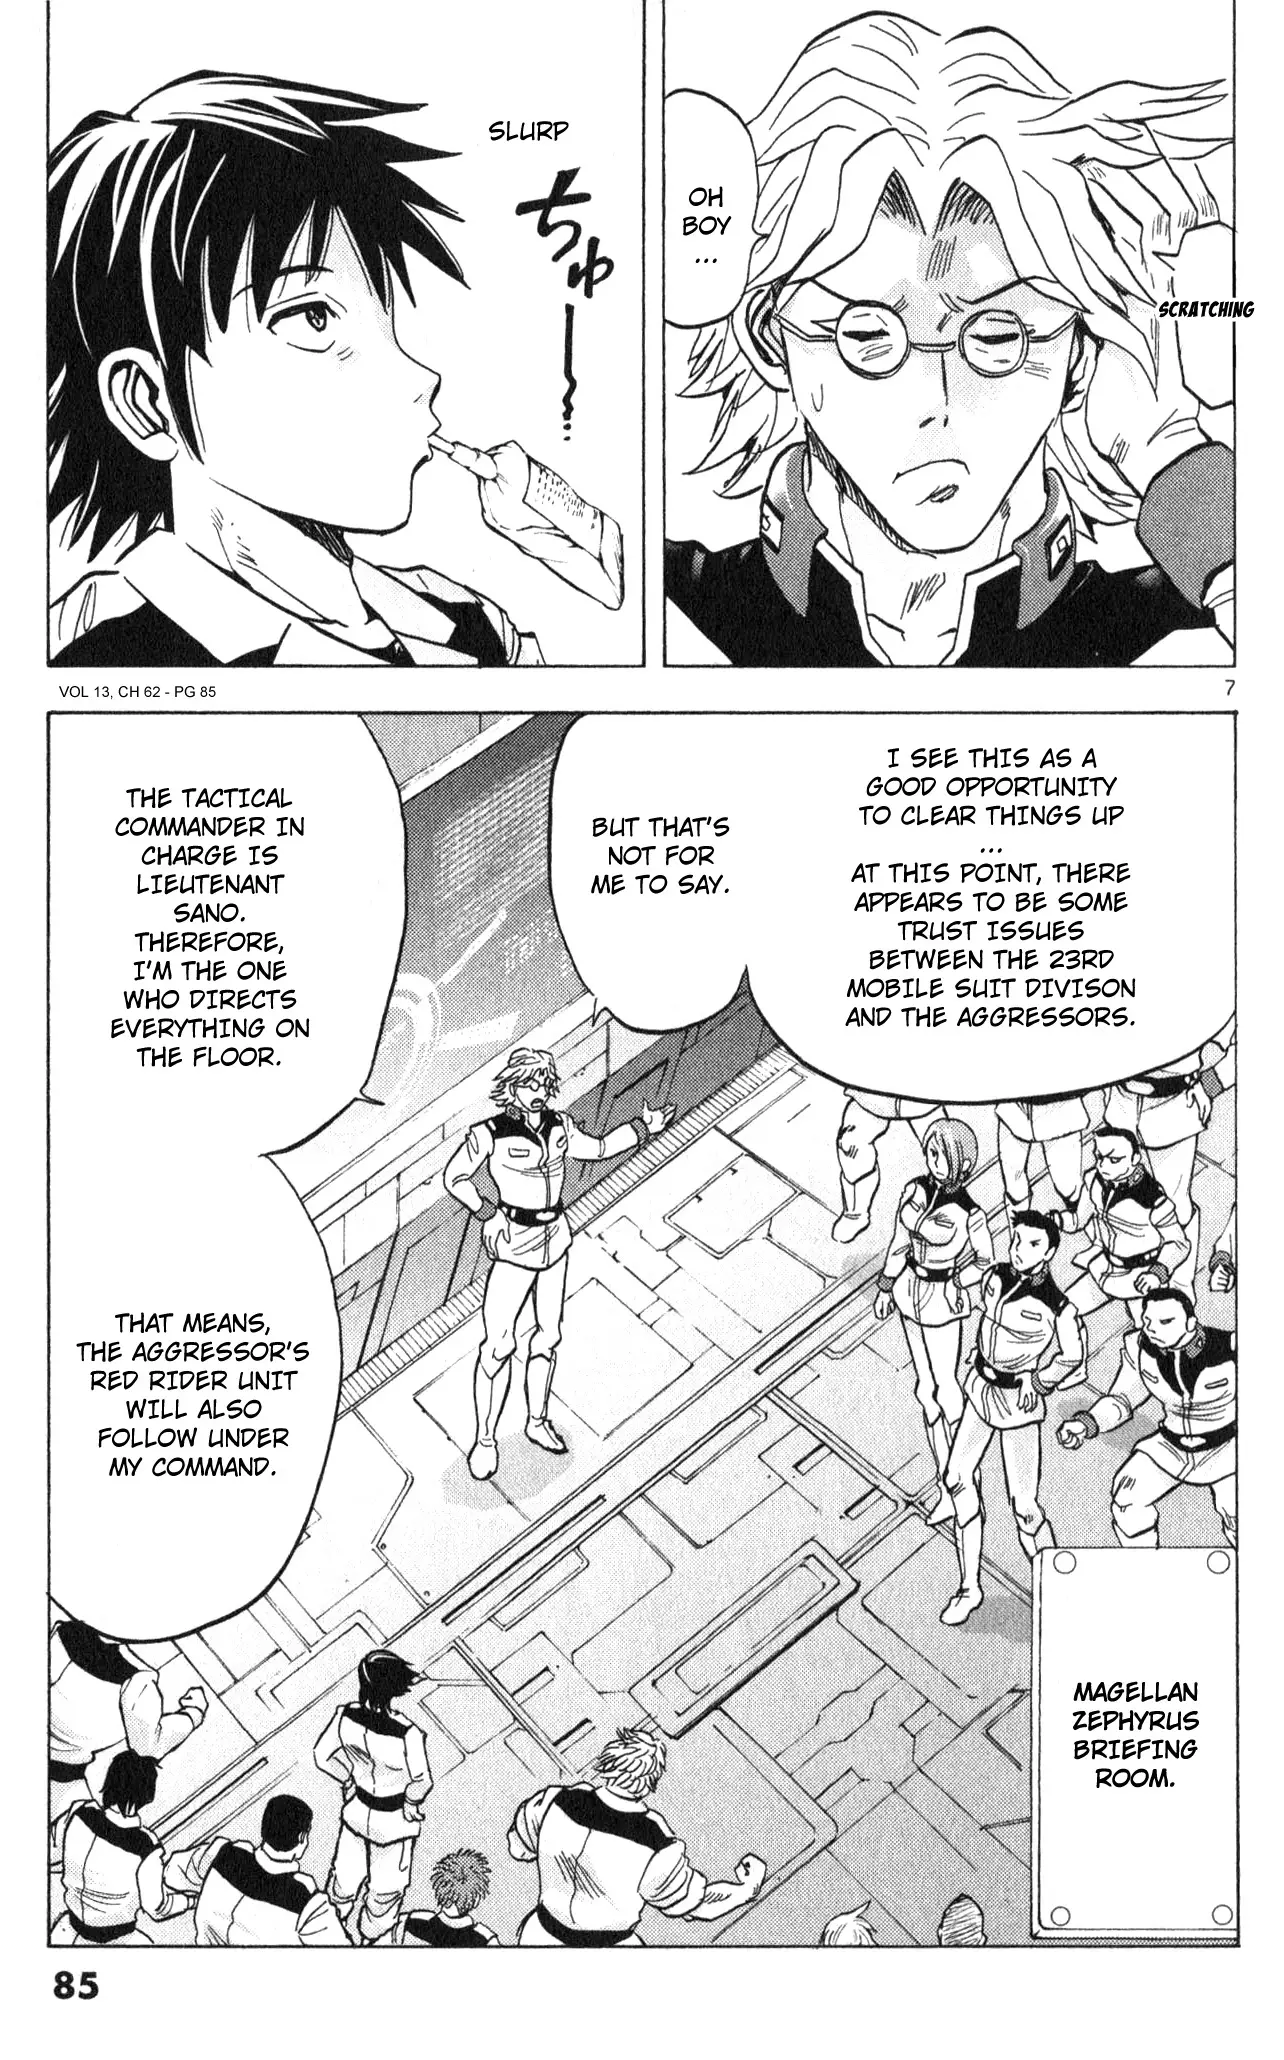 Mobile Suit Gundam Aggressor - 62 page 7-4b6eaded